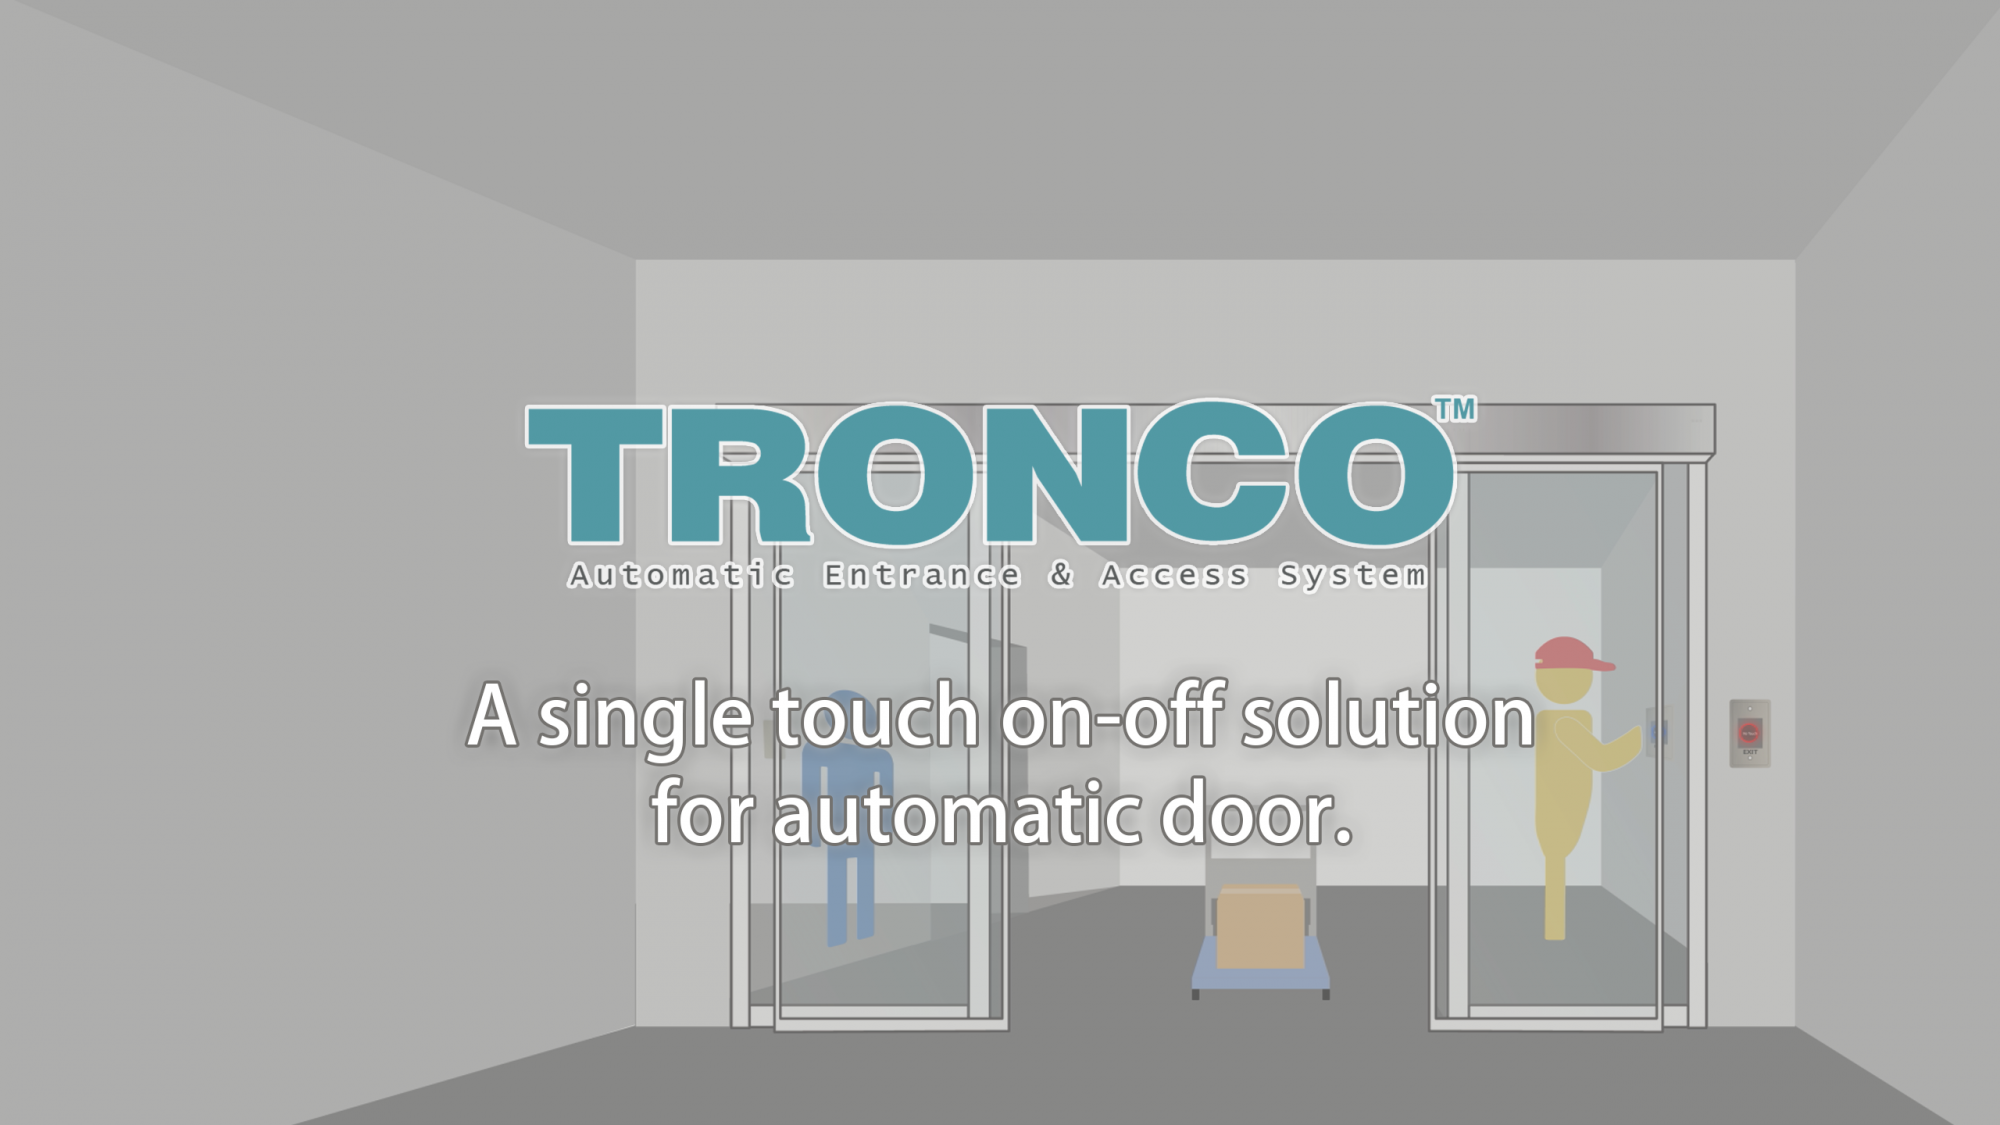 A single touch on-off solution for automatic door.